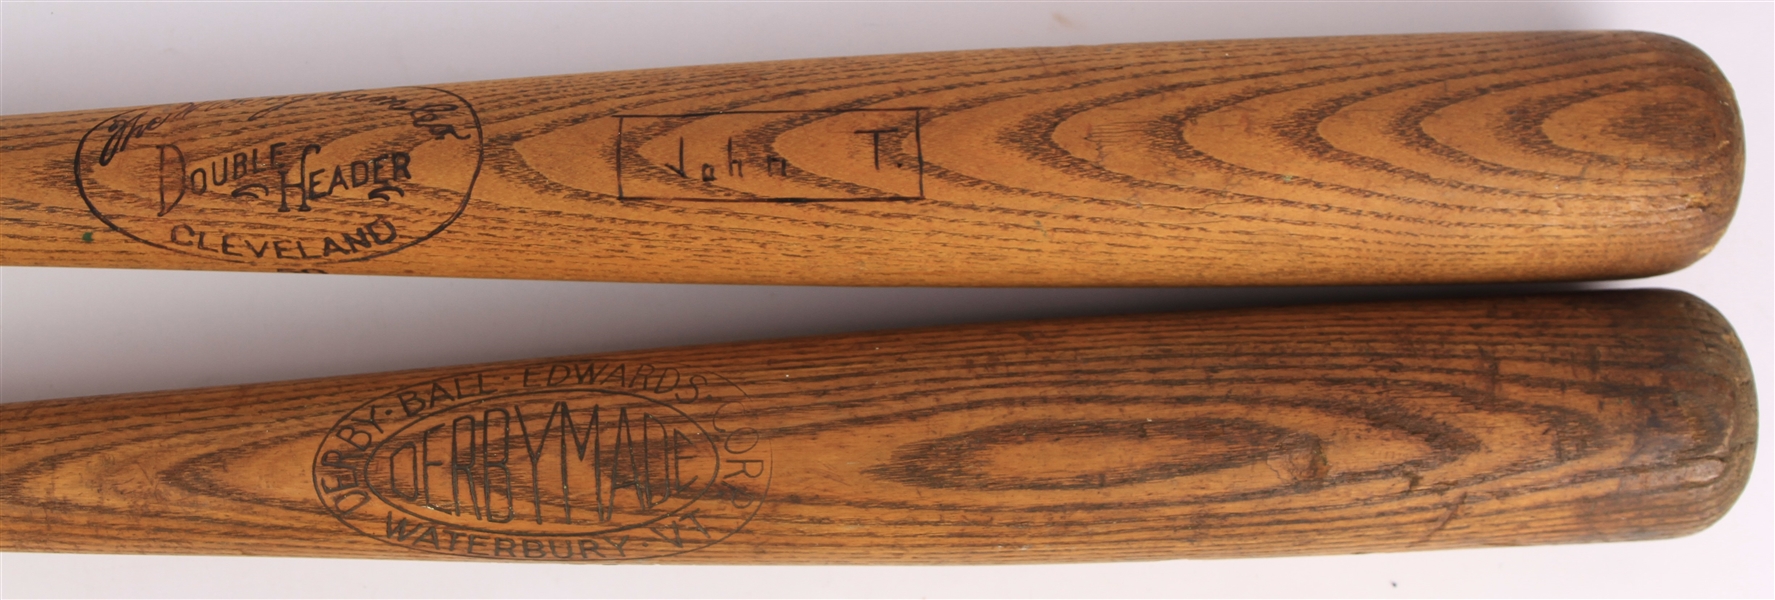 1930s Store Model Baseball Bat Collection - Lot of 2 w/ Bingham Double Header & Derby Made